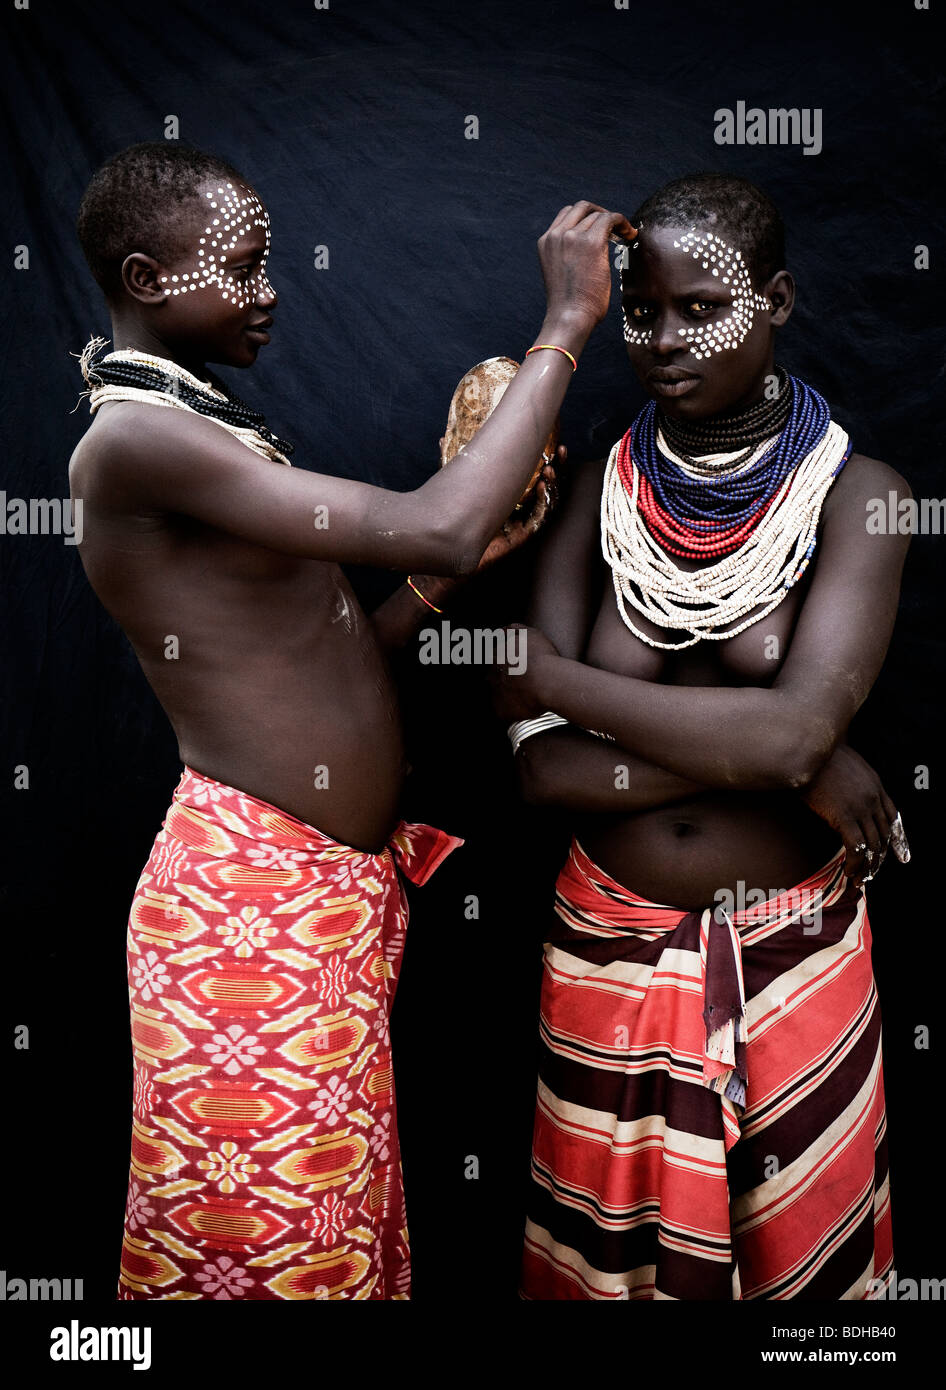 Portrait of two young women in traditional attire and body decoration posed before a black cloth. Stock Photo